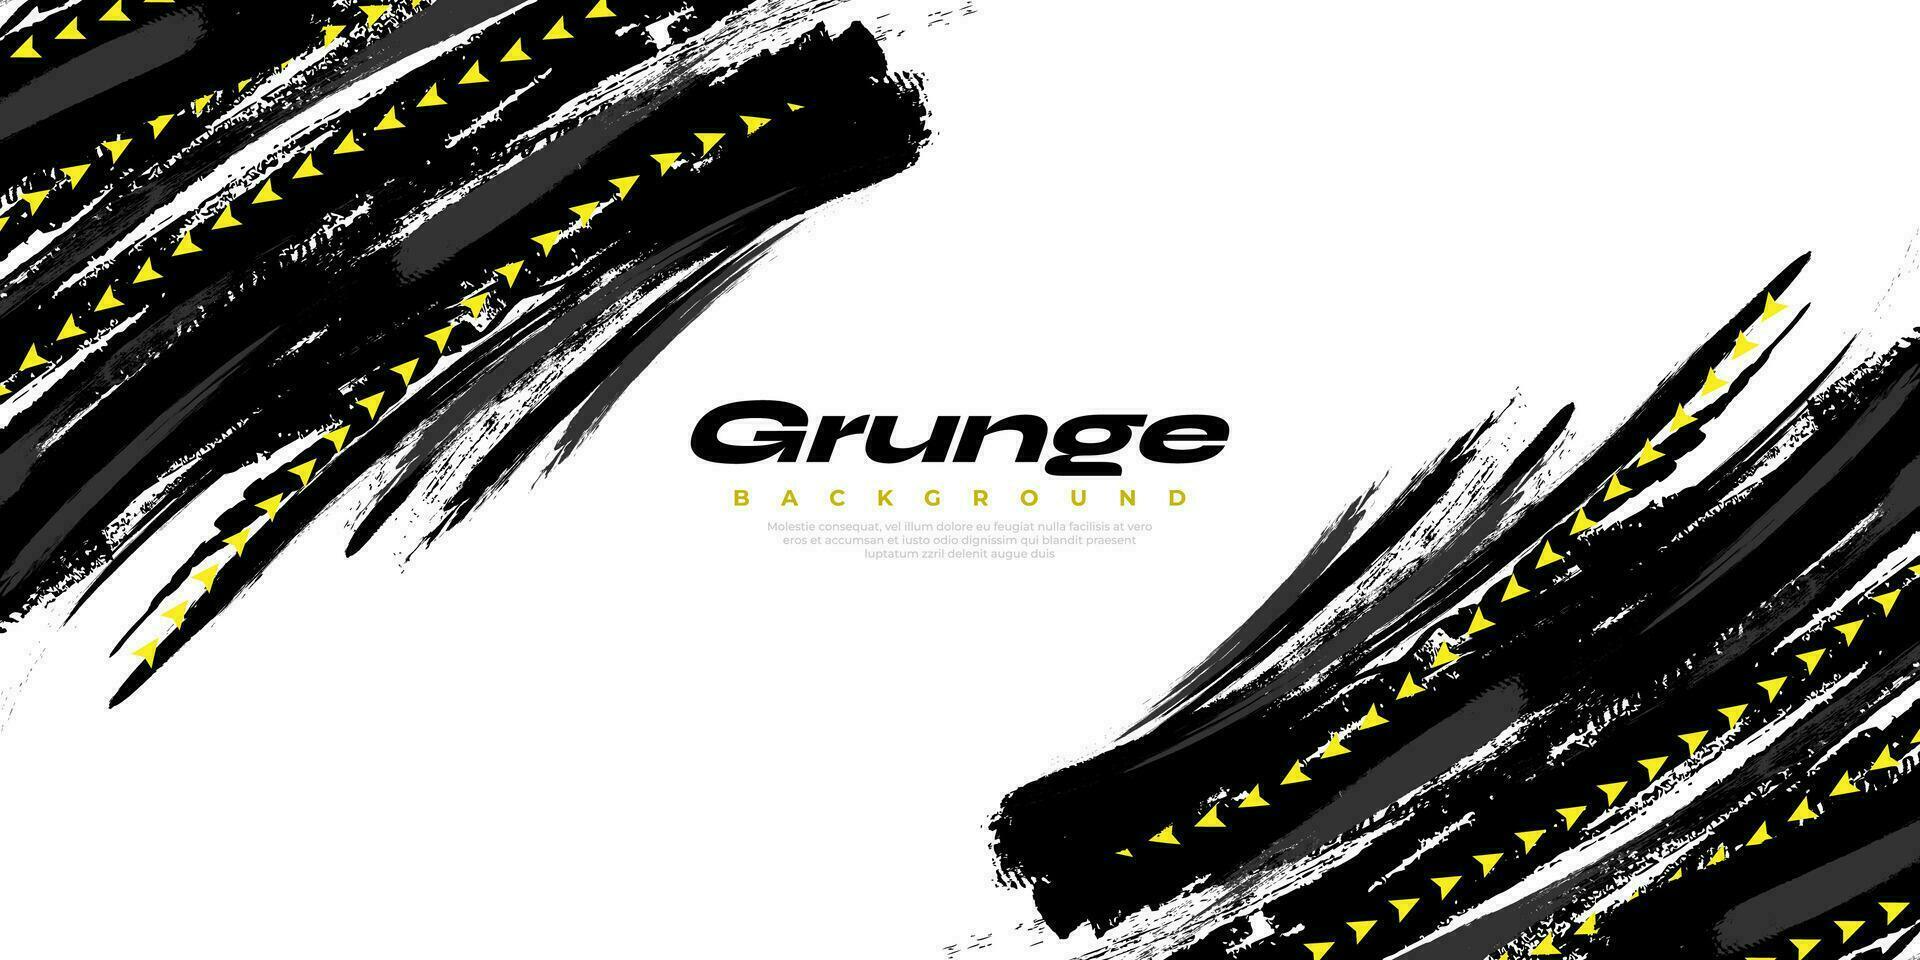 Black Grunge Brush Background with Yellow Arrow Isolated on White Background. Sport Background. Scratch and Texture Elements For Design vector